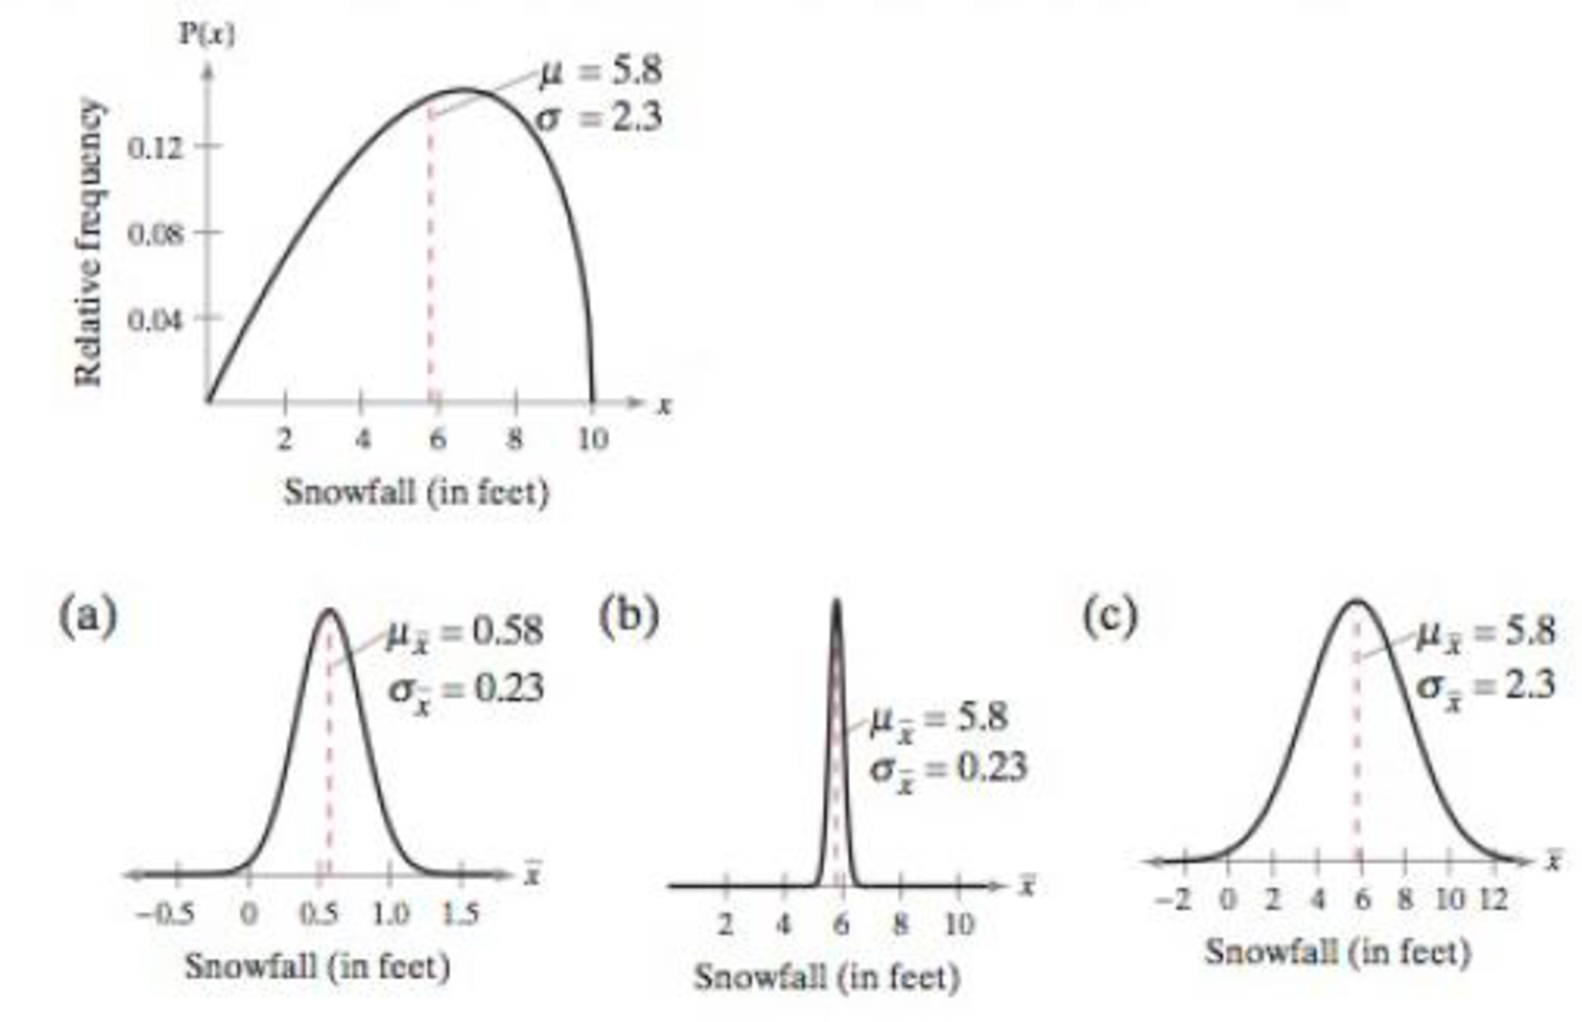 Chapter 5.4, Problem 10E, Graphical Analysis In Exercises 9 and 10, the graph of a population distribution is shown with its 